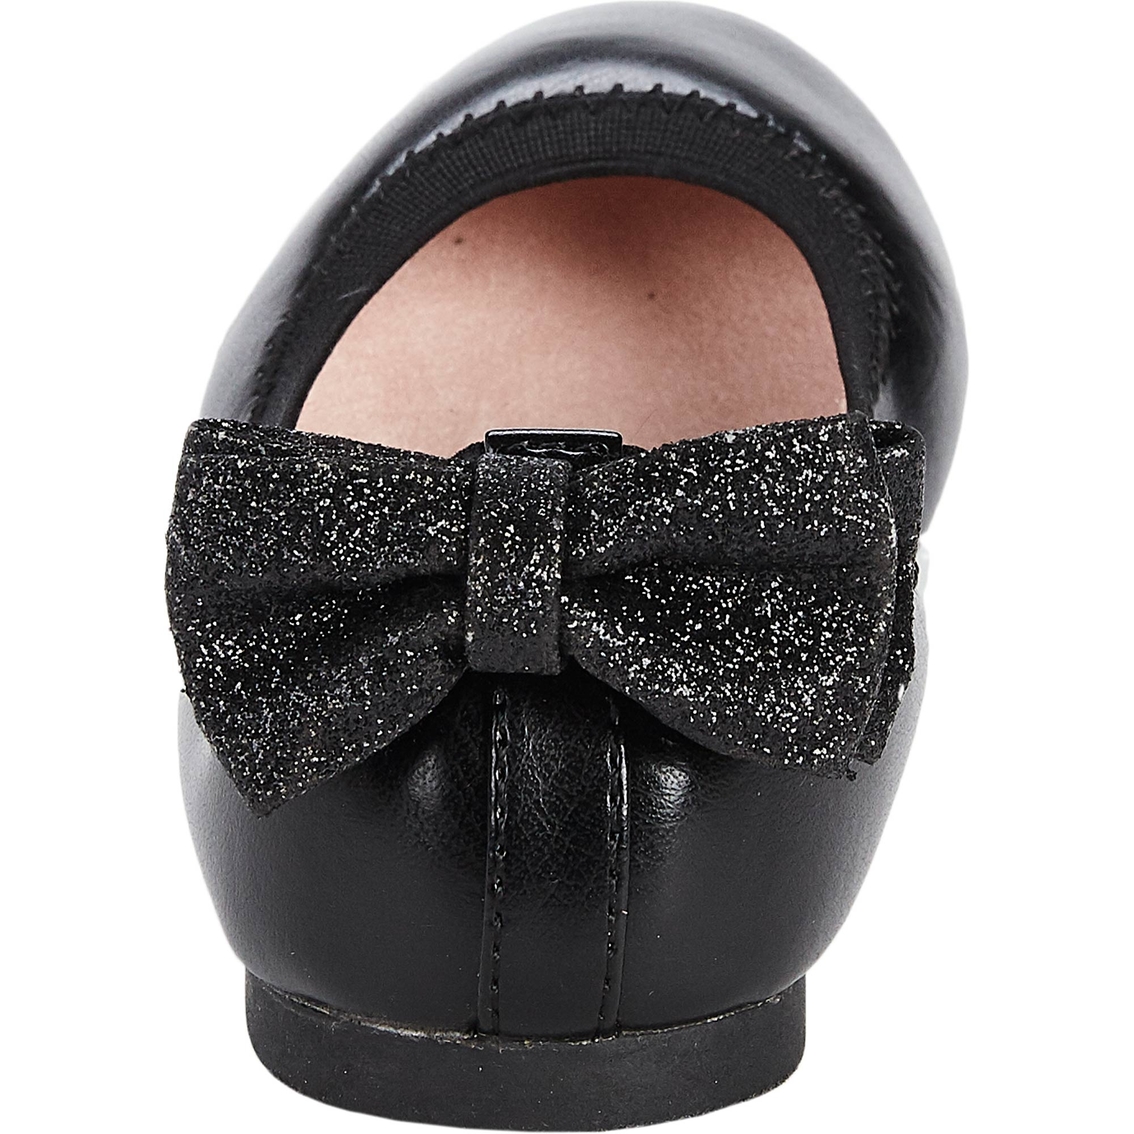 L.A. Underground Preschool Girls Classic Ballerina Flat Shoes with Back Bow - Image 3 of 4